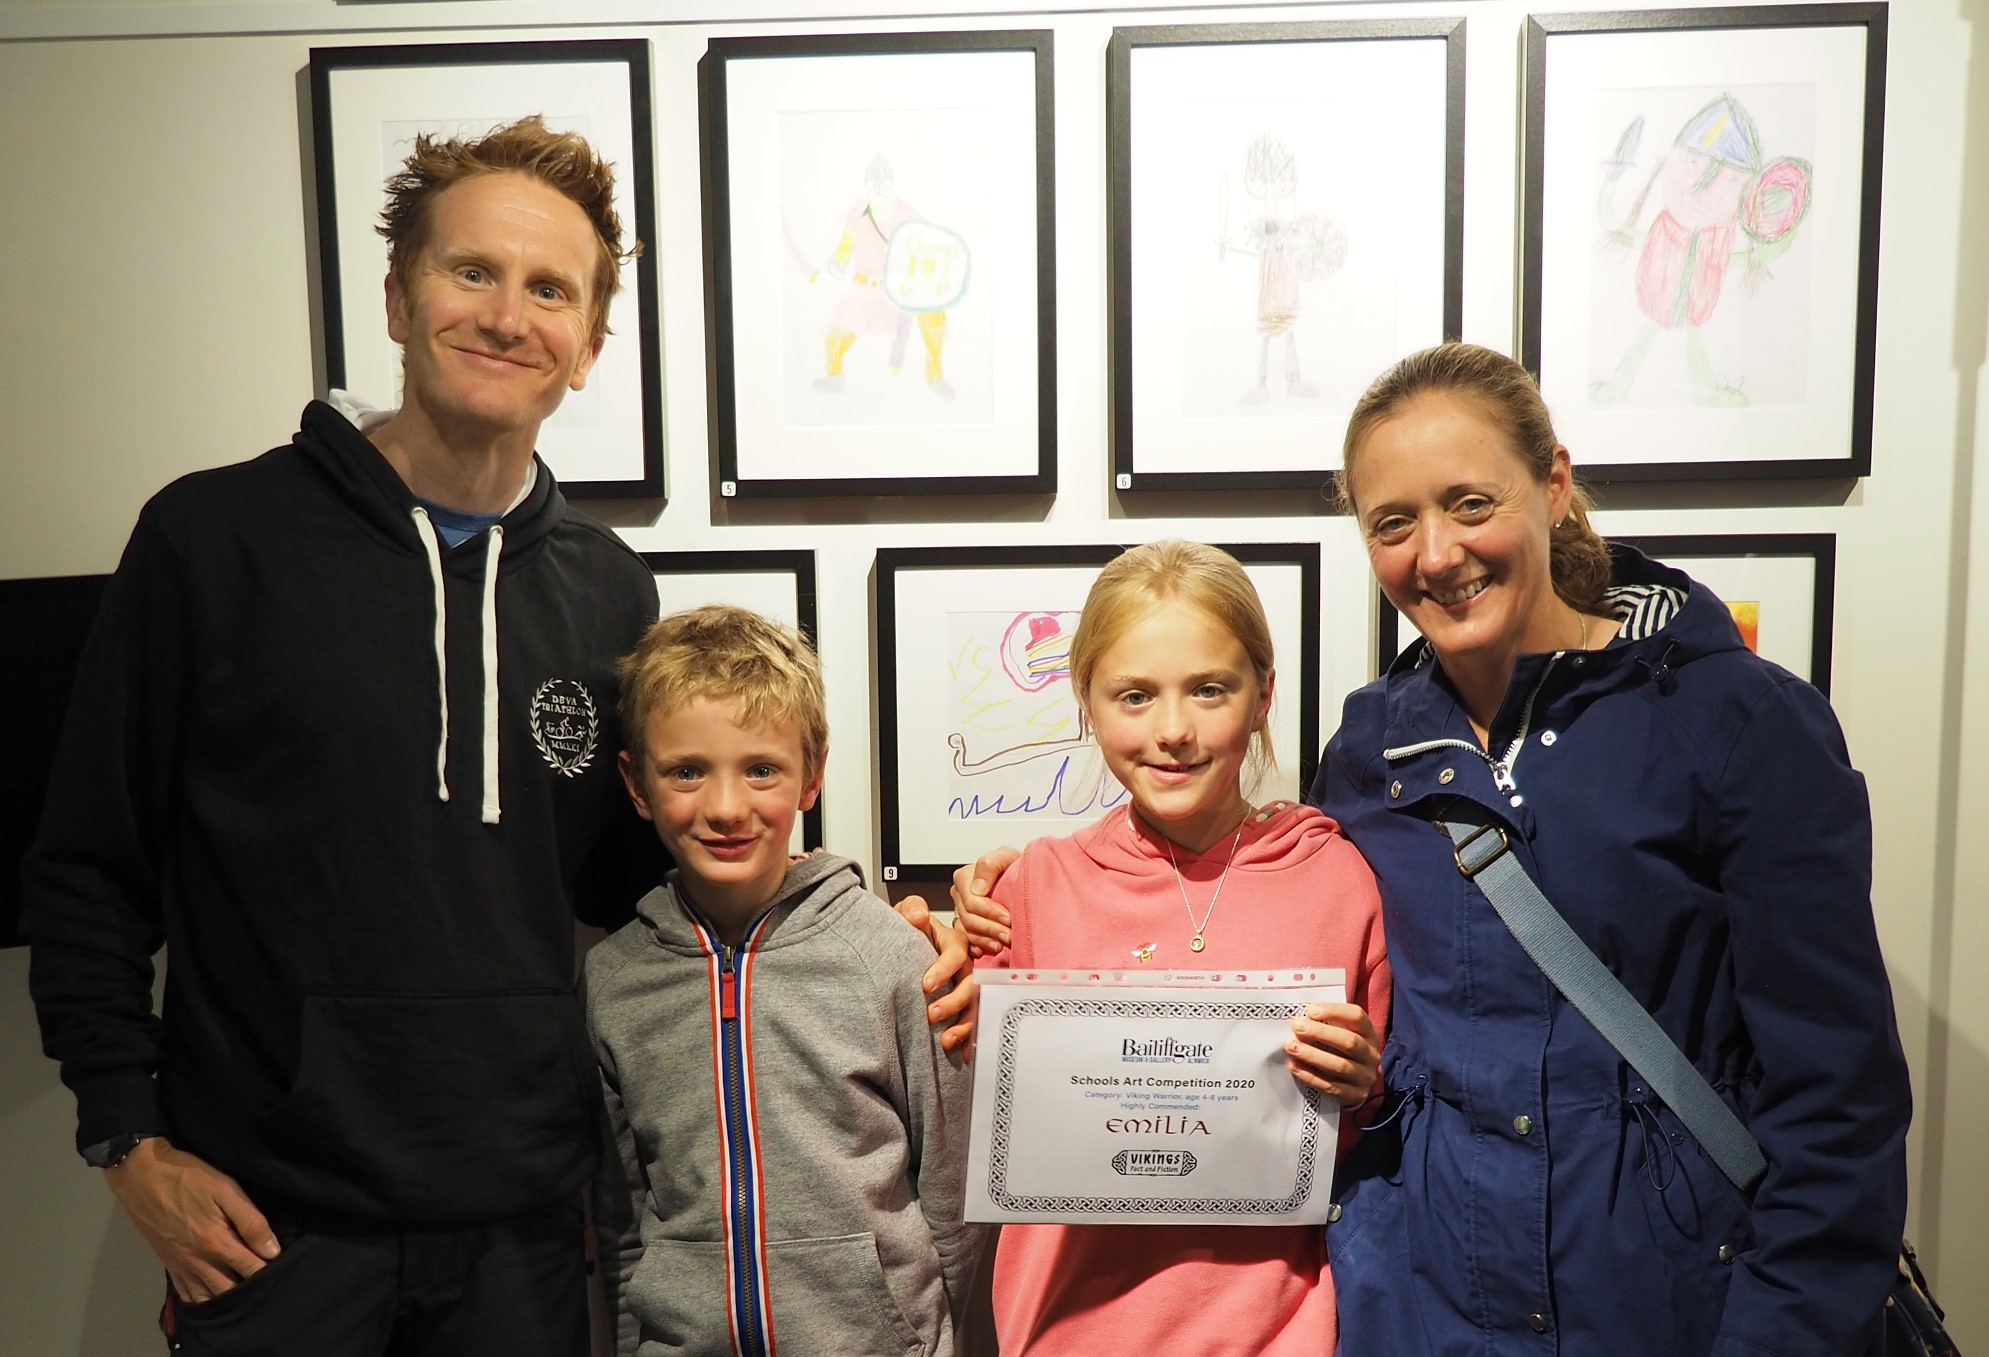 A family of two adults and two children, one holding a certificate, in front of a wall of framed children's pictures.